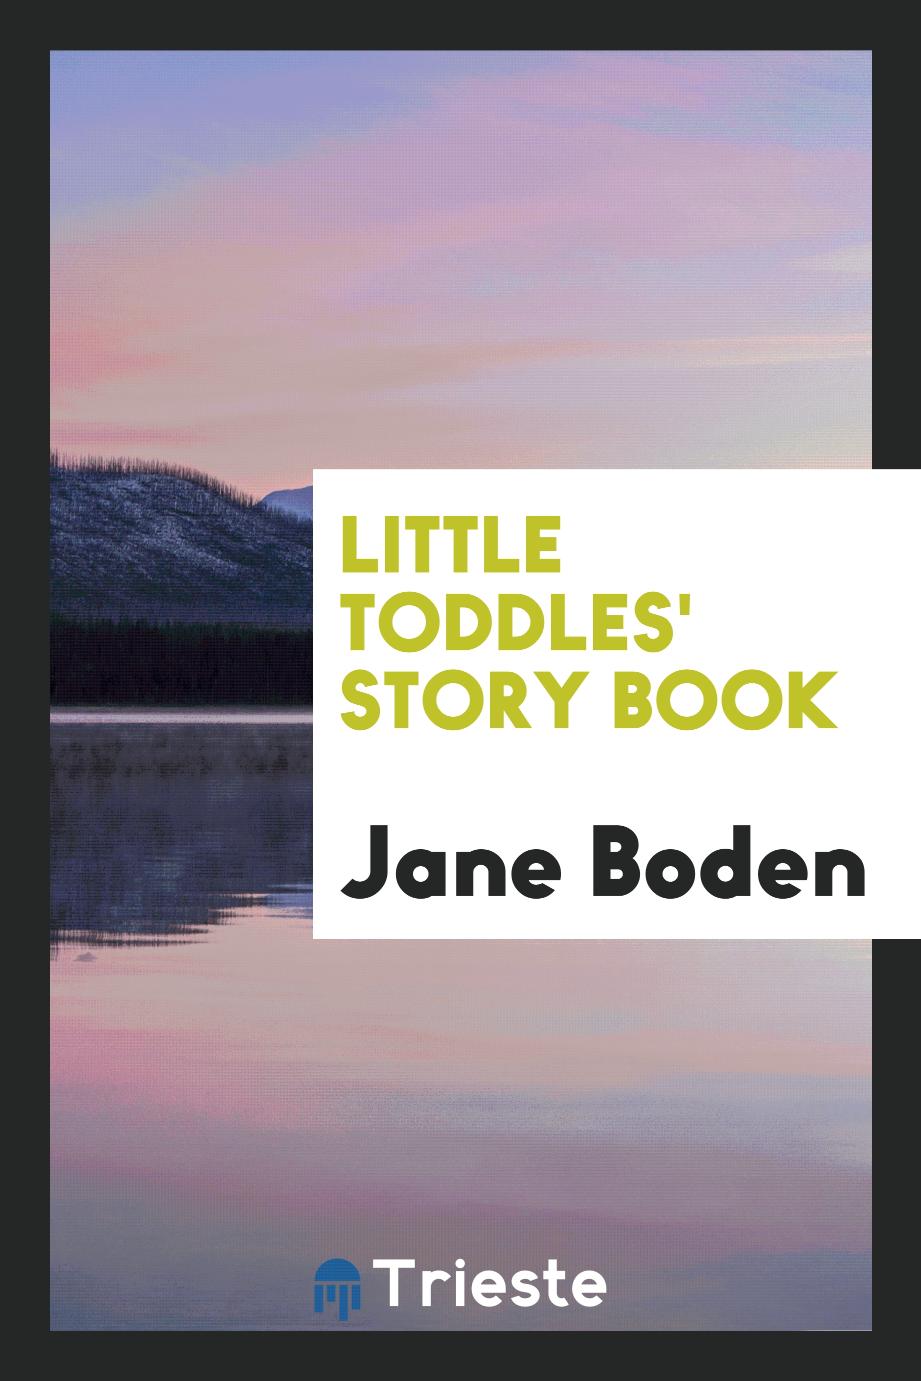 Little Toddles' Story Book